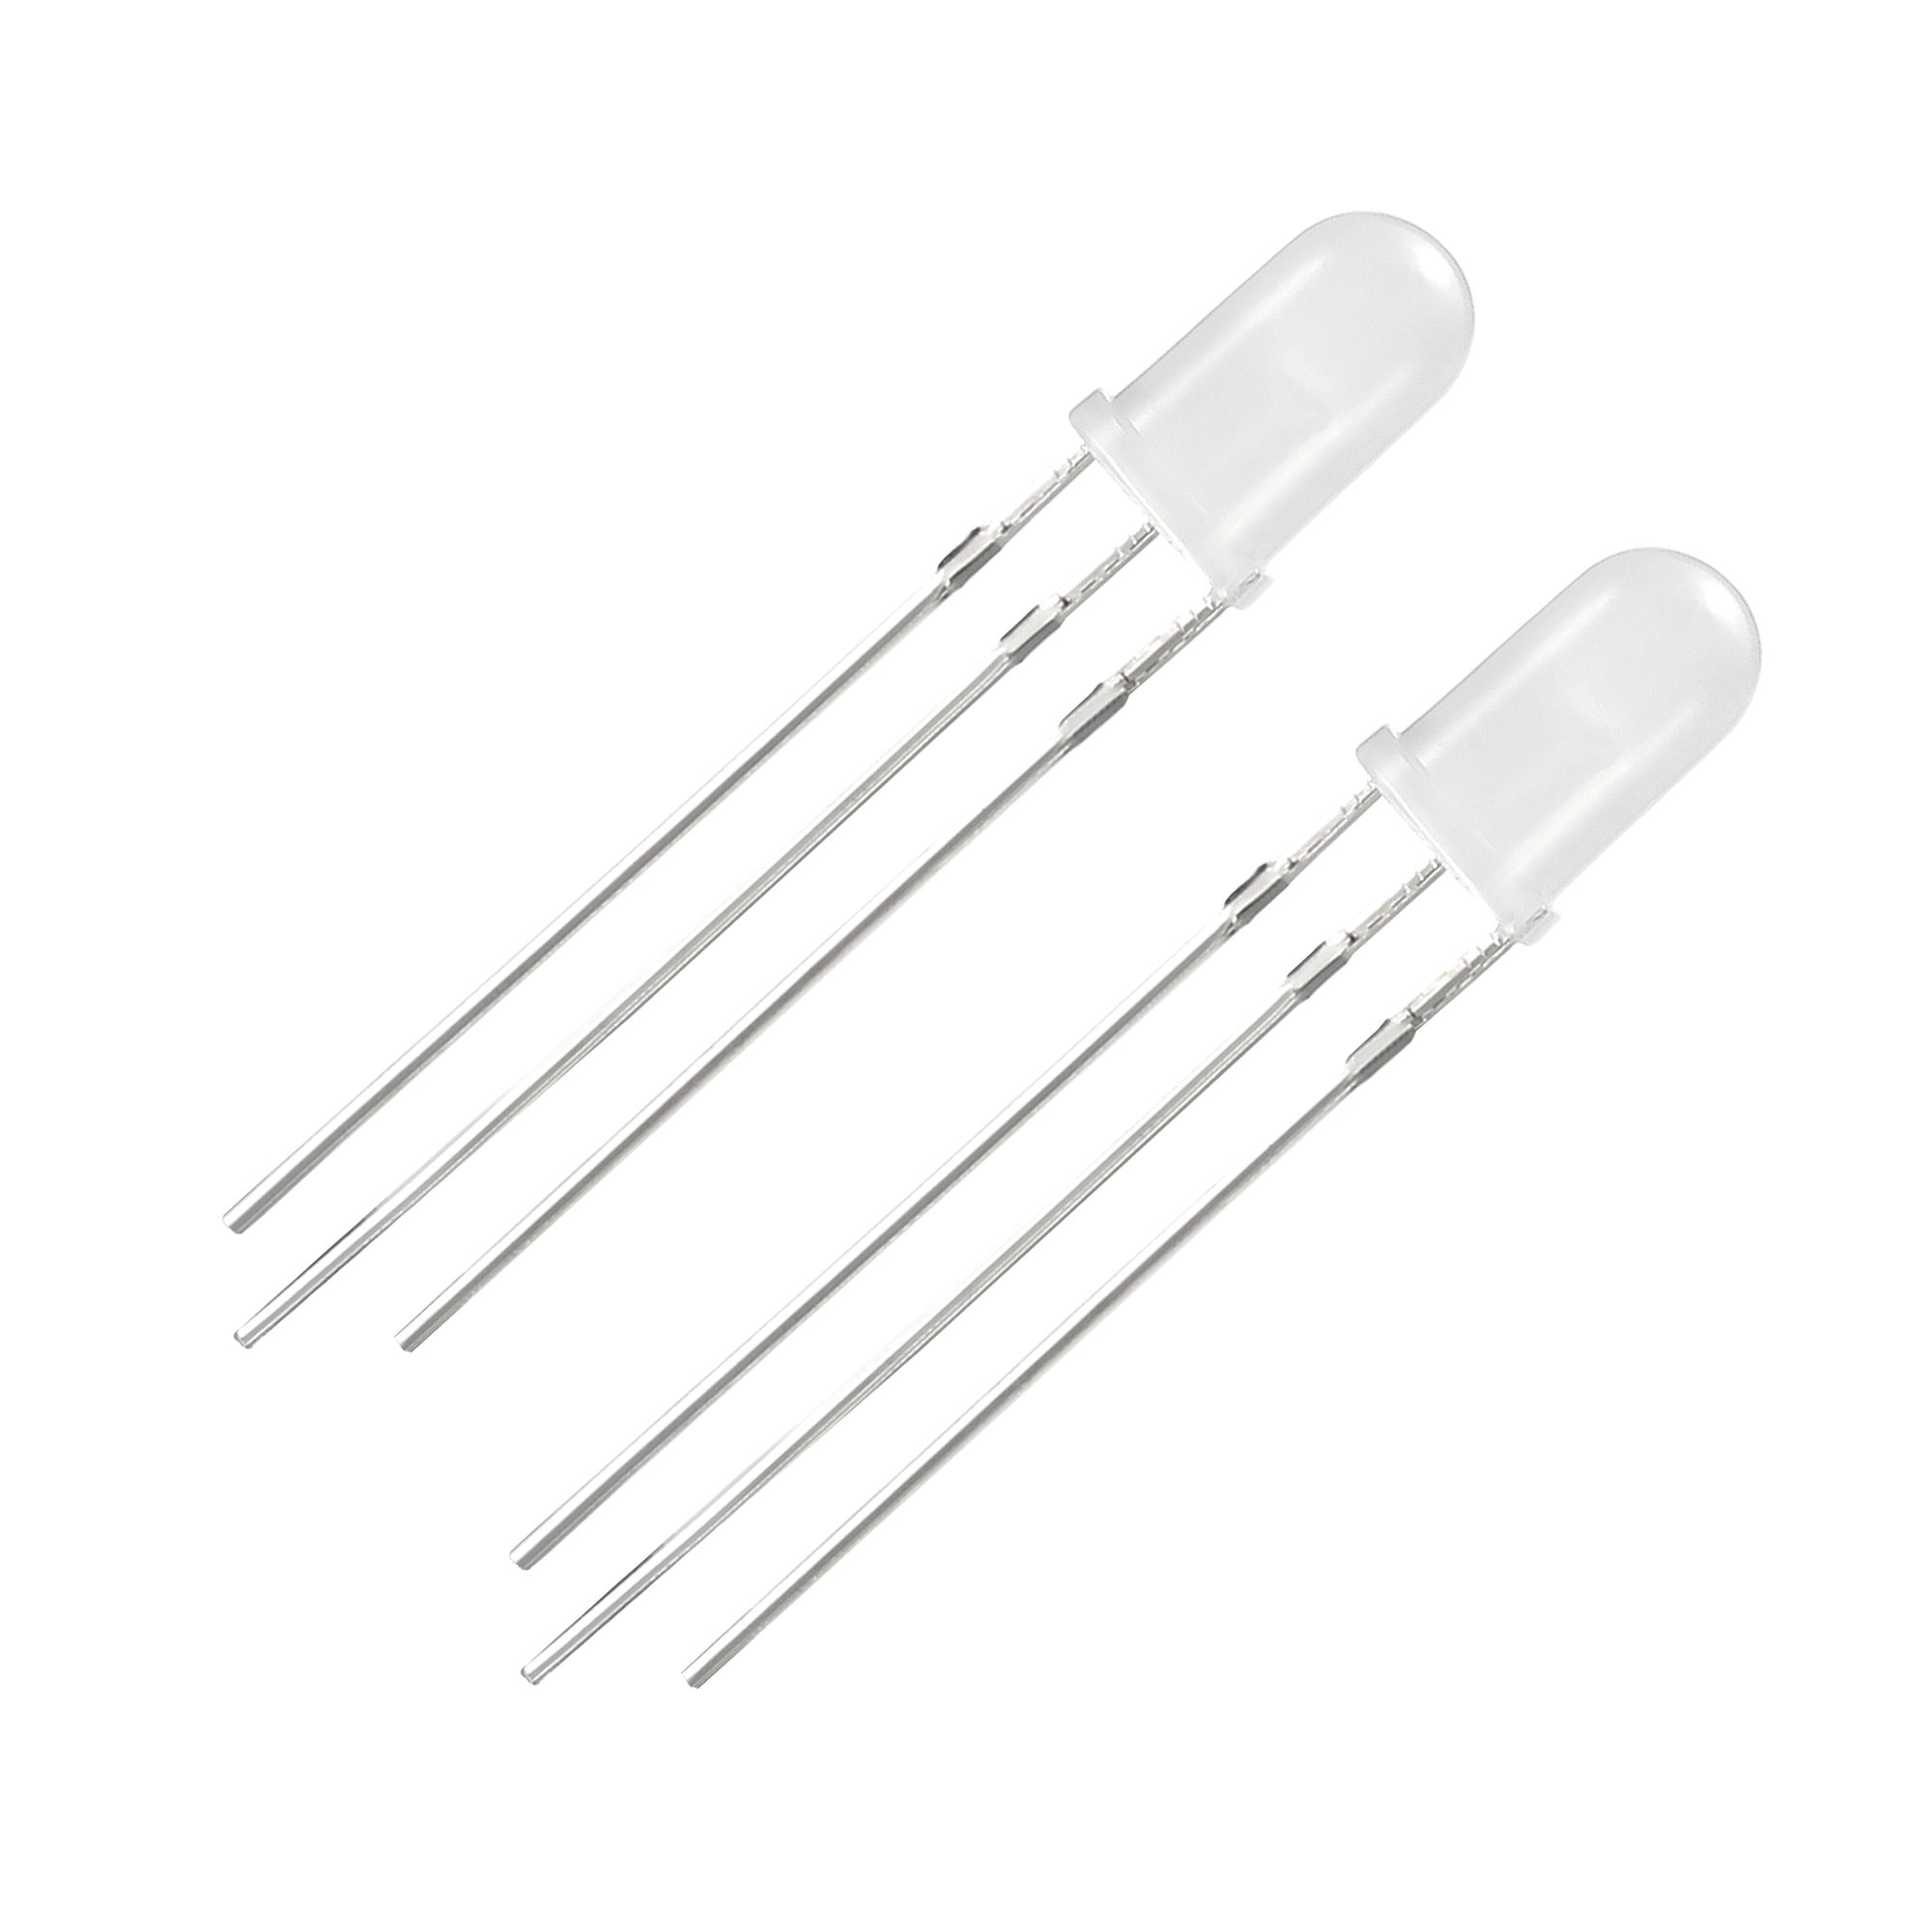 20PCS 5mm Dual Bi-Color Red Blue Bright 3-Pin Water Clear bulb LED Common Anode 